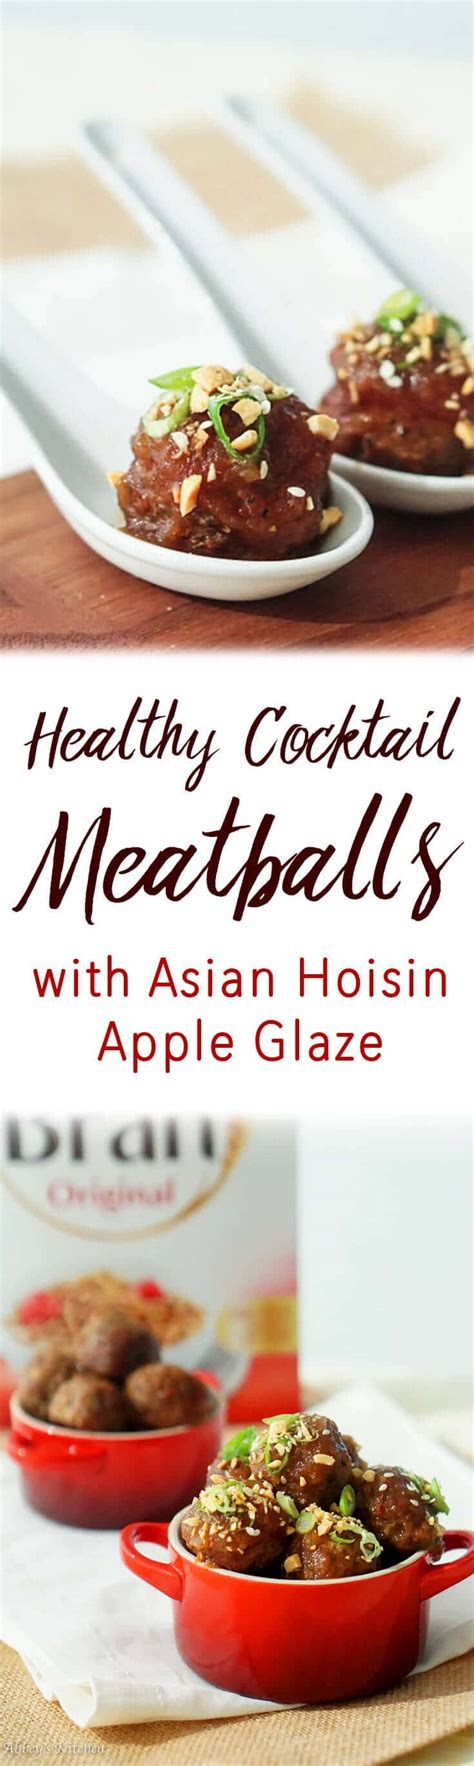 healthy-cocktail-meatballs-with-asian-hoisin-apple image